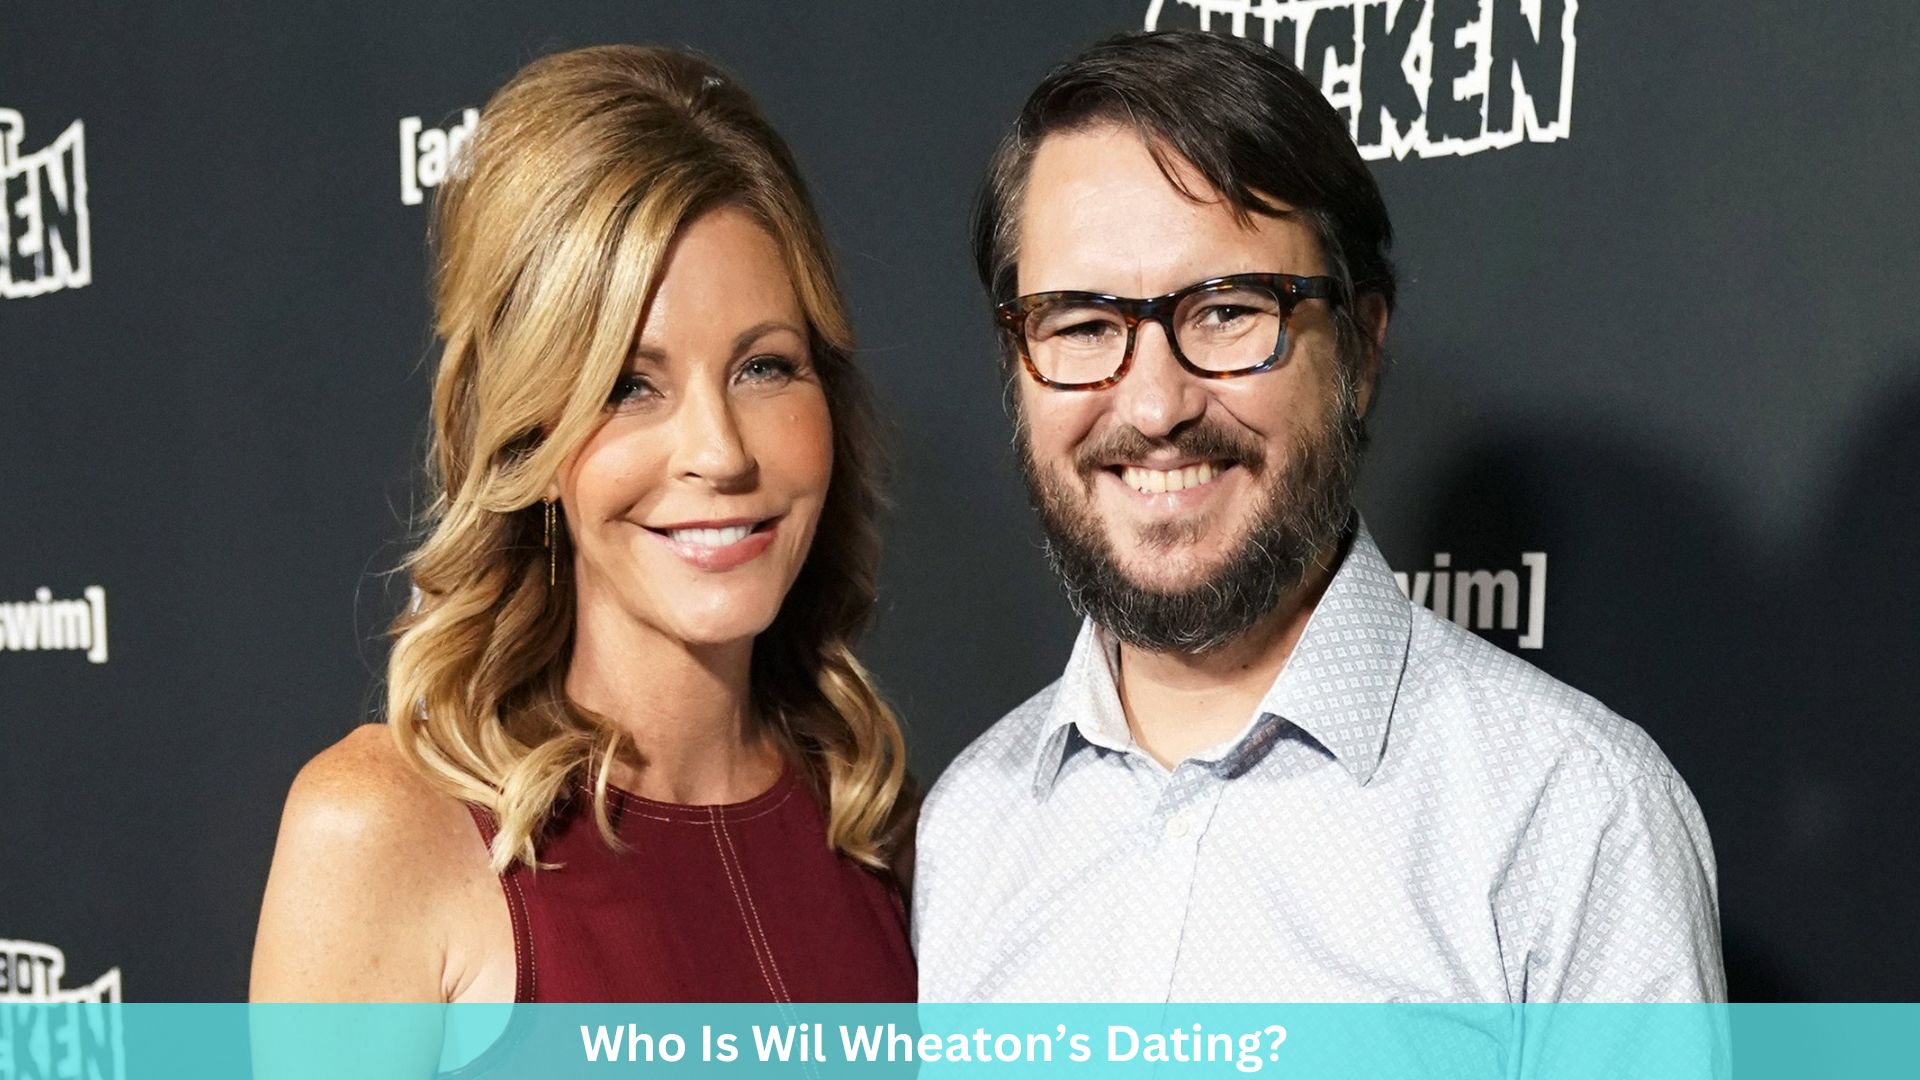 Who Is Wil Wheaton’s Dating?